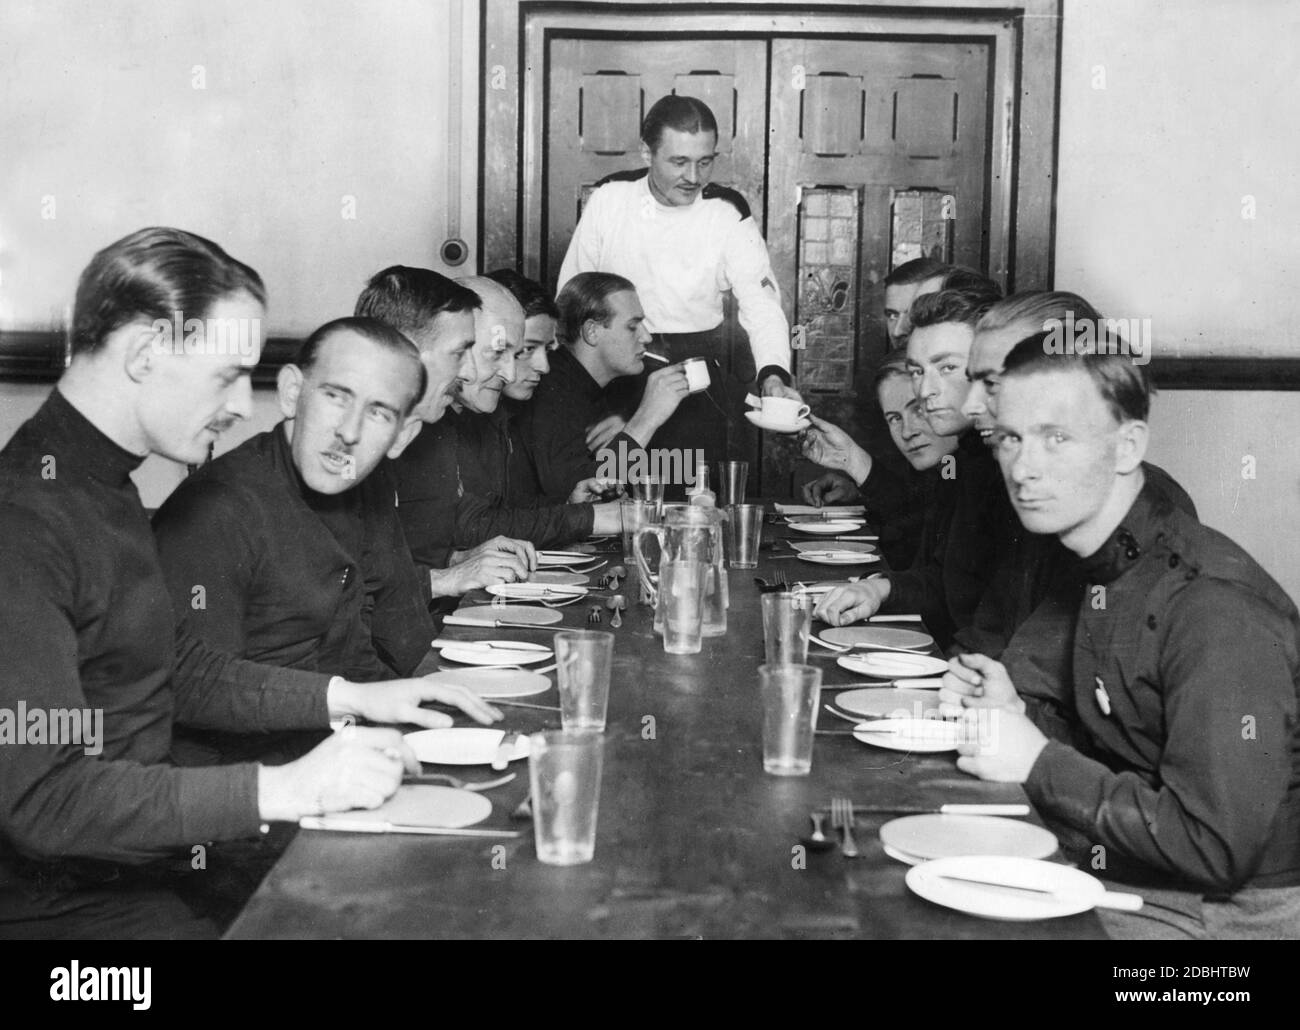 'Members of the ''British Union of Fascists'' (BUF) at dinner in the new headquarters in London's Chelsea district. Front left, Oswald Mosley. (undated photo)' Stock Photo